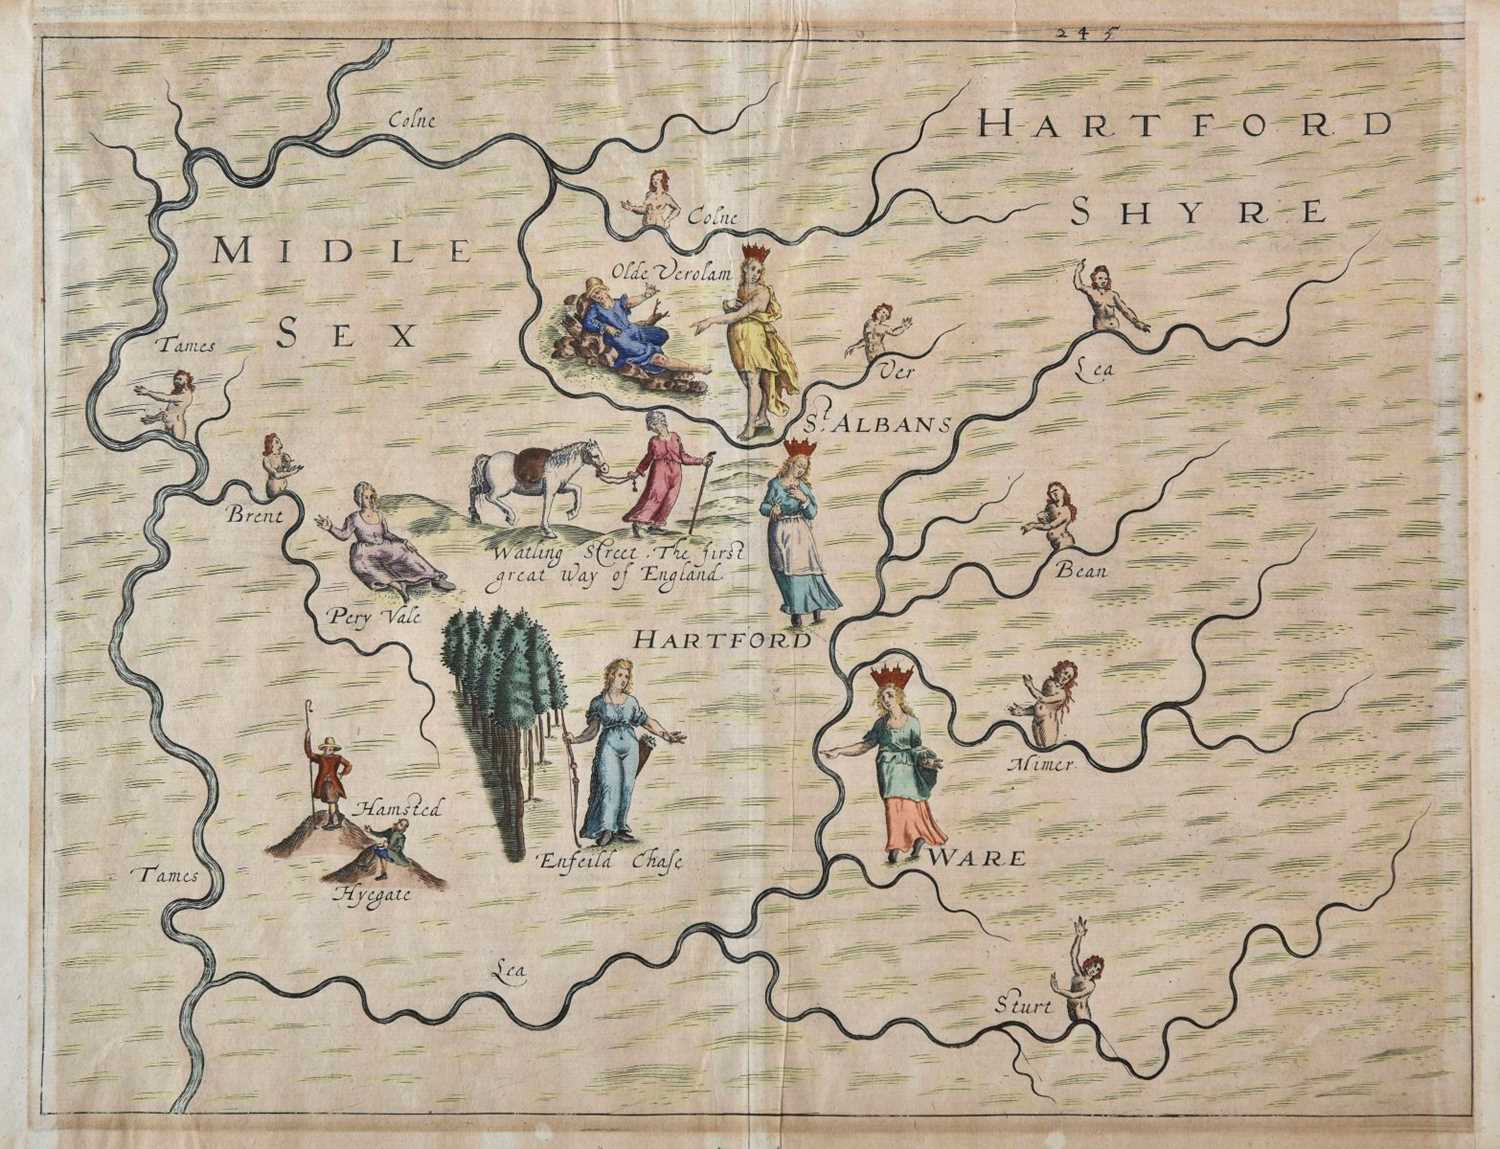 Lot 60 - Middlesex. Drayton (Michael), Untitled allegorical map of Middlesex and Hertfordshire, circa 1612